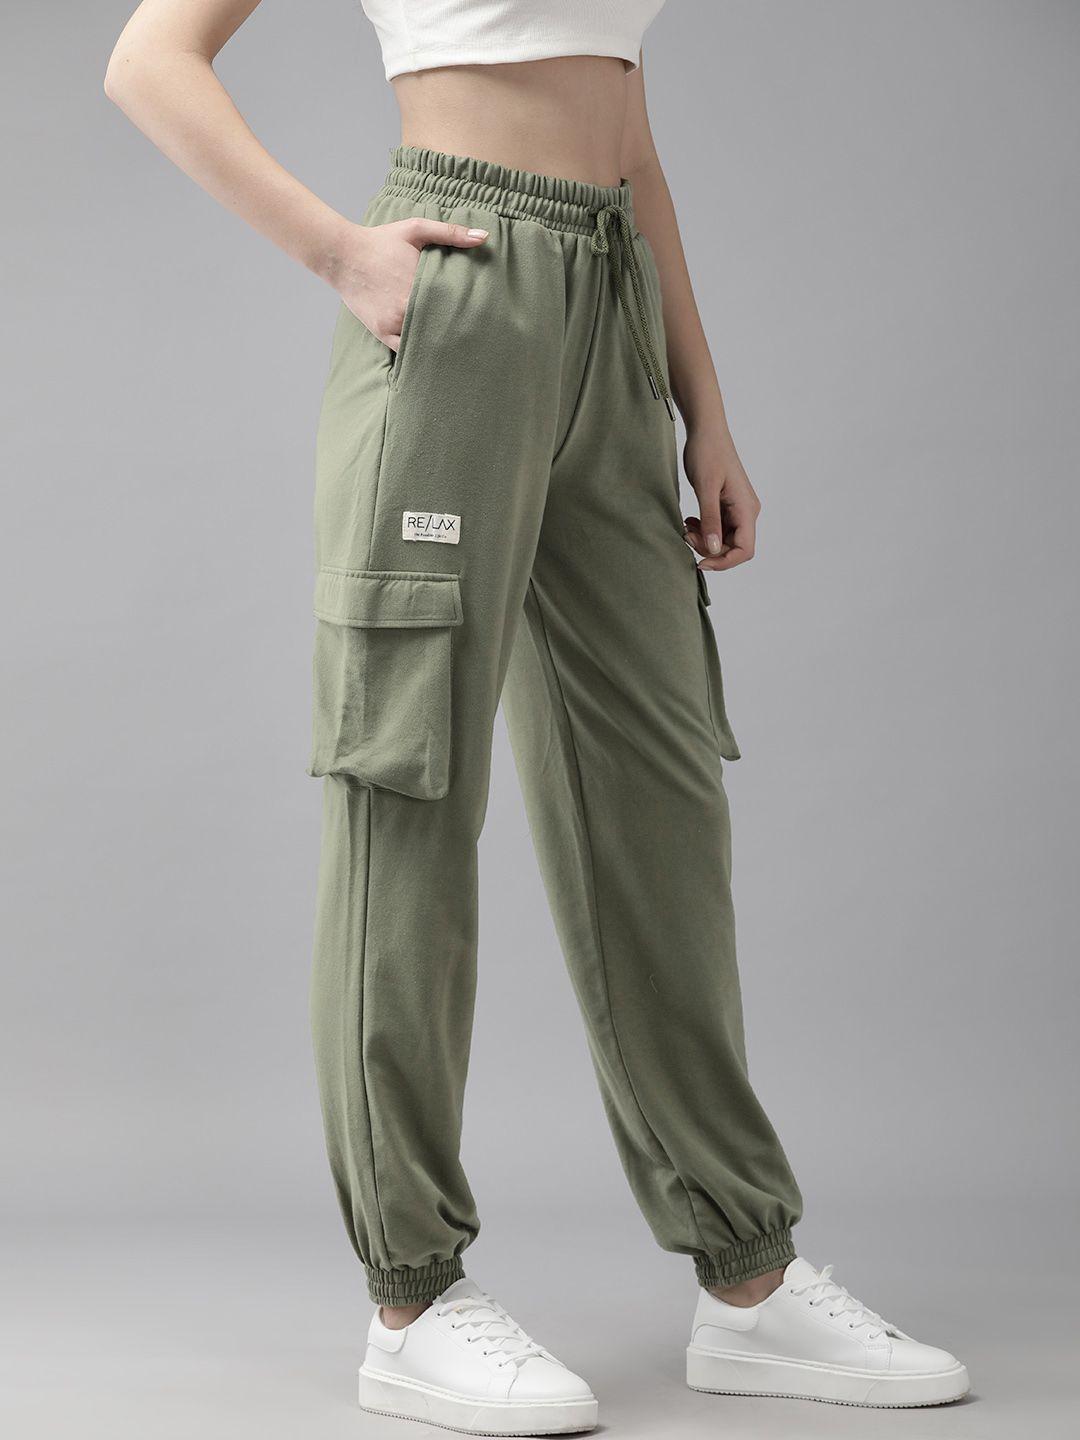 the roadster lifestyle co. women cargo joggers